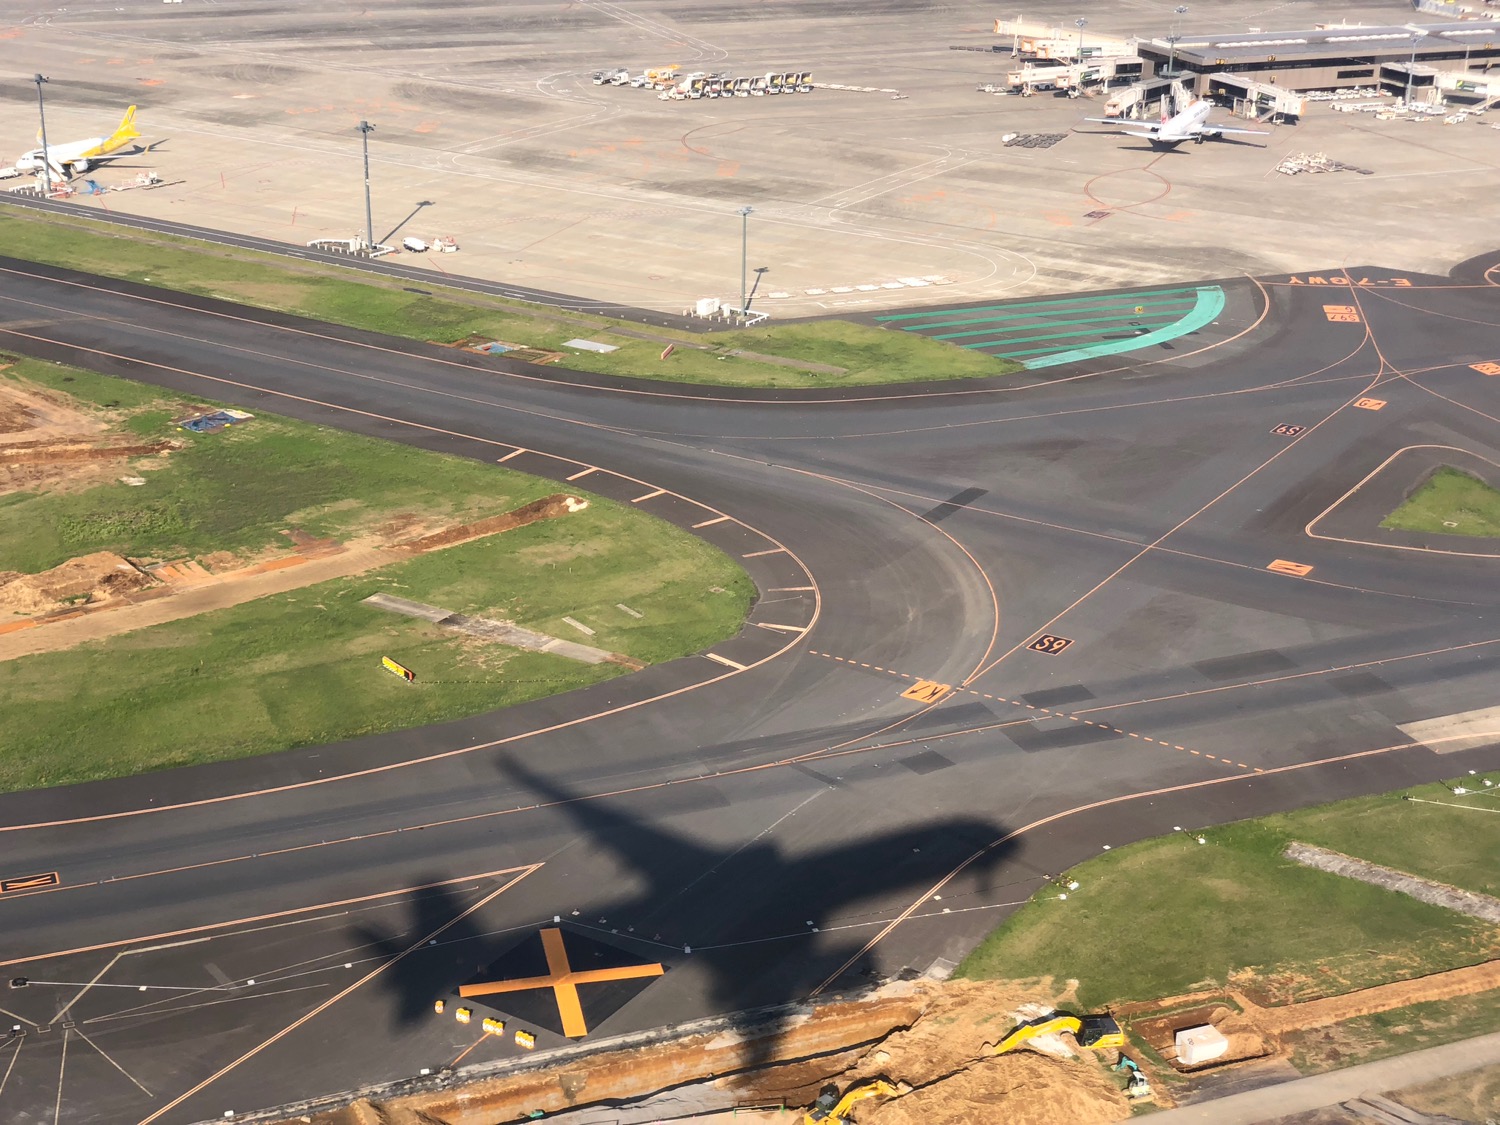 an airport runway with an airplane shadow on the ground